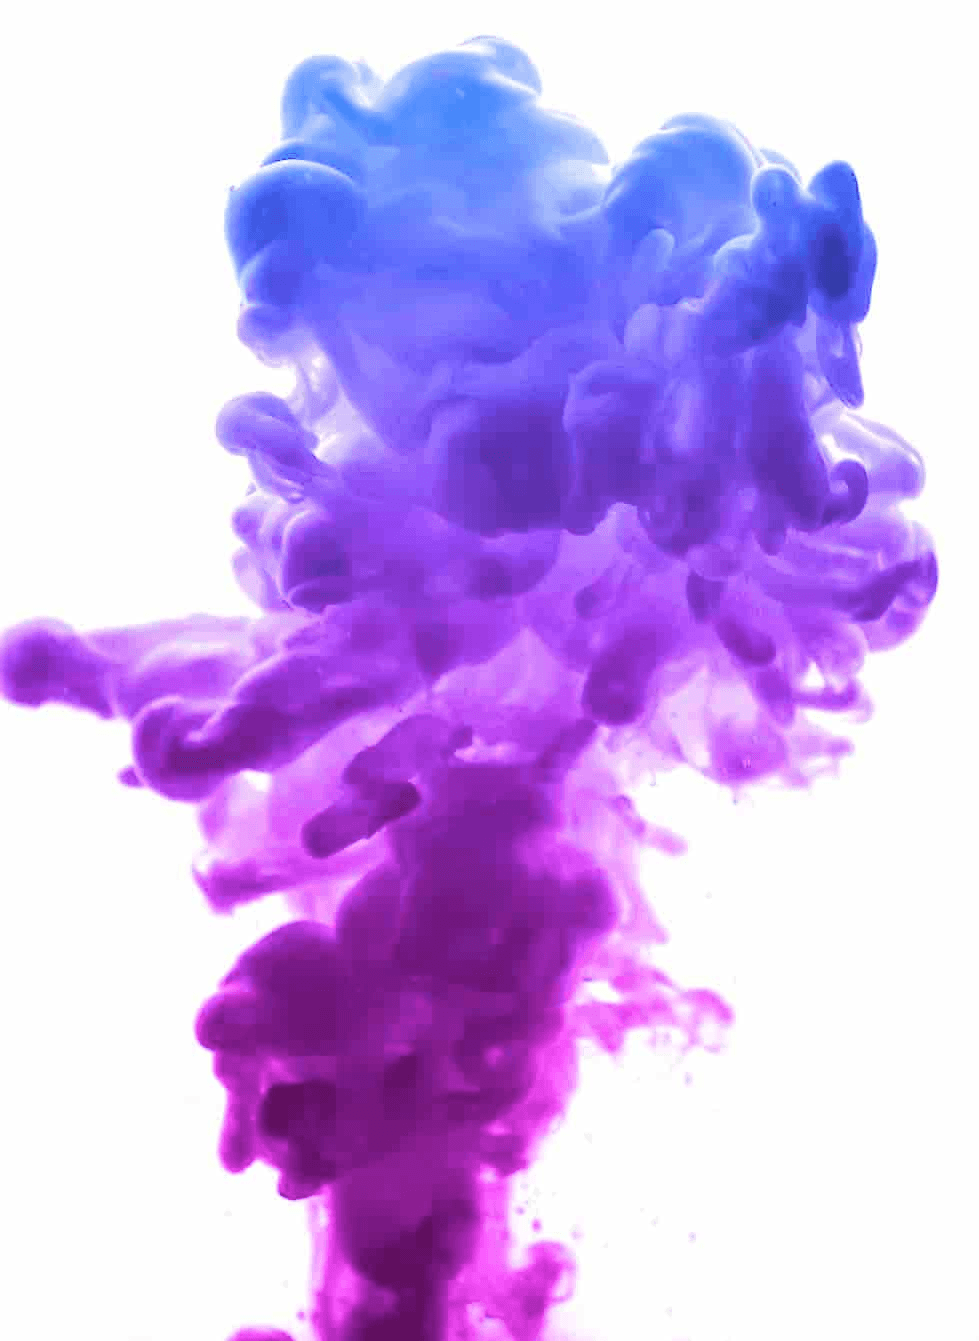 A vibrant purple smoke plume against a white background